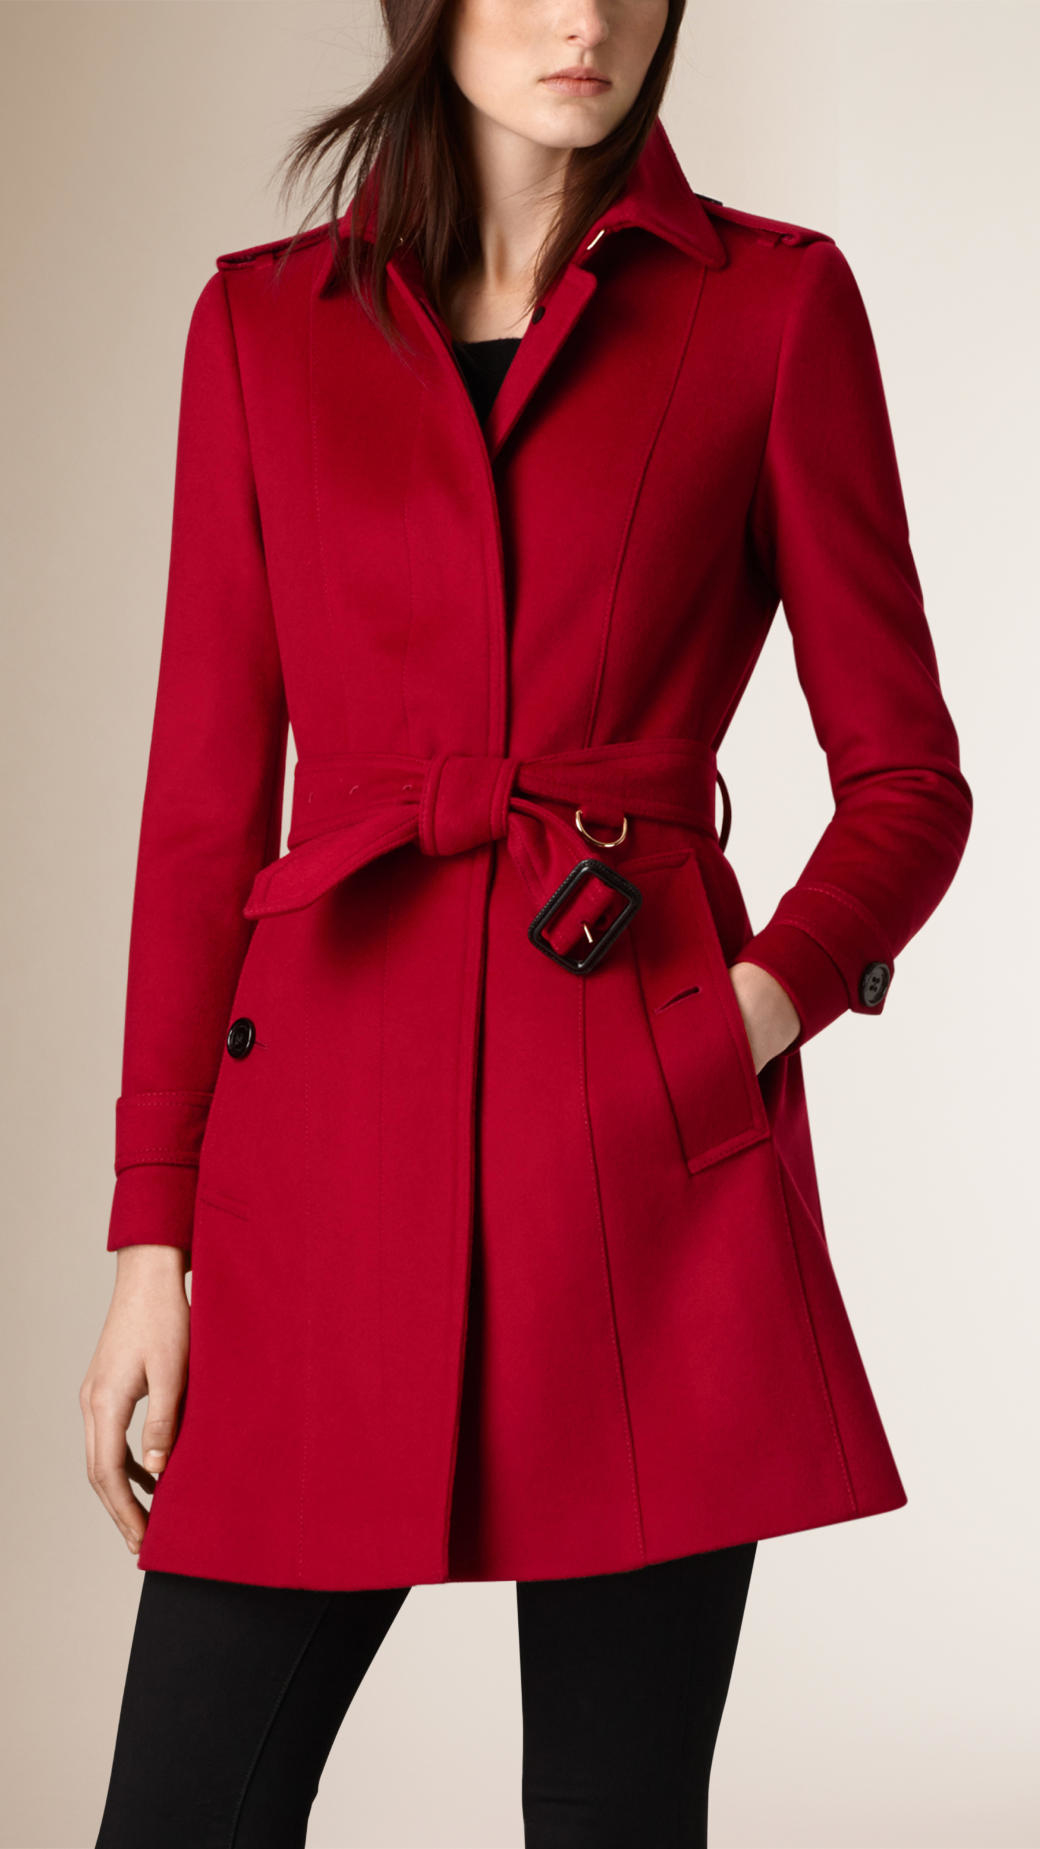 Burberry Pleat Detail Wool Cashmere Trench Coat in Red - Lyst